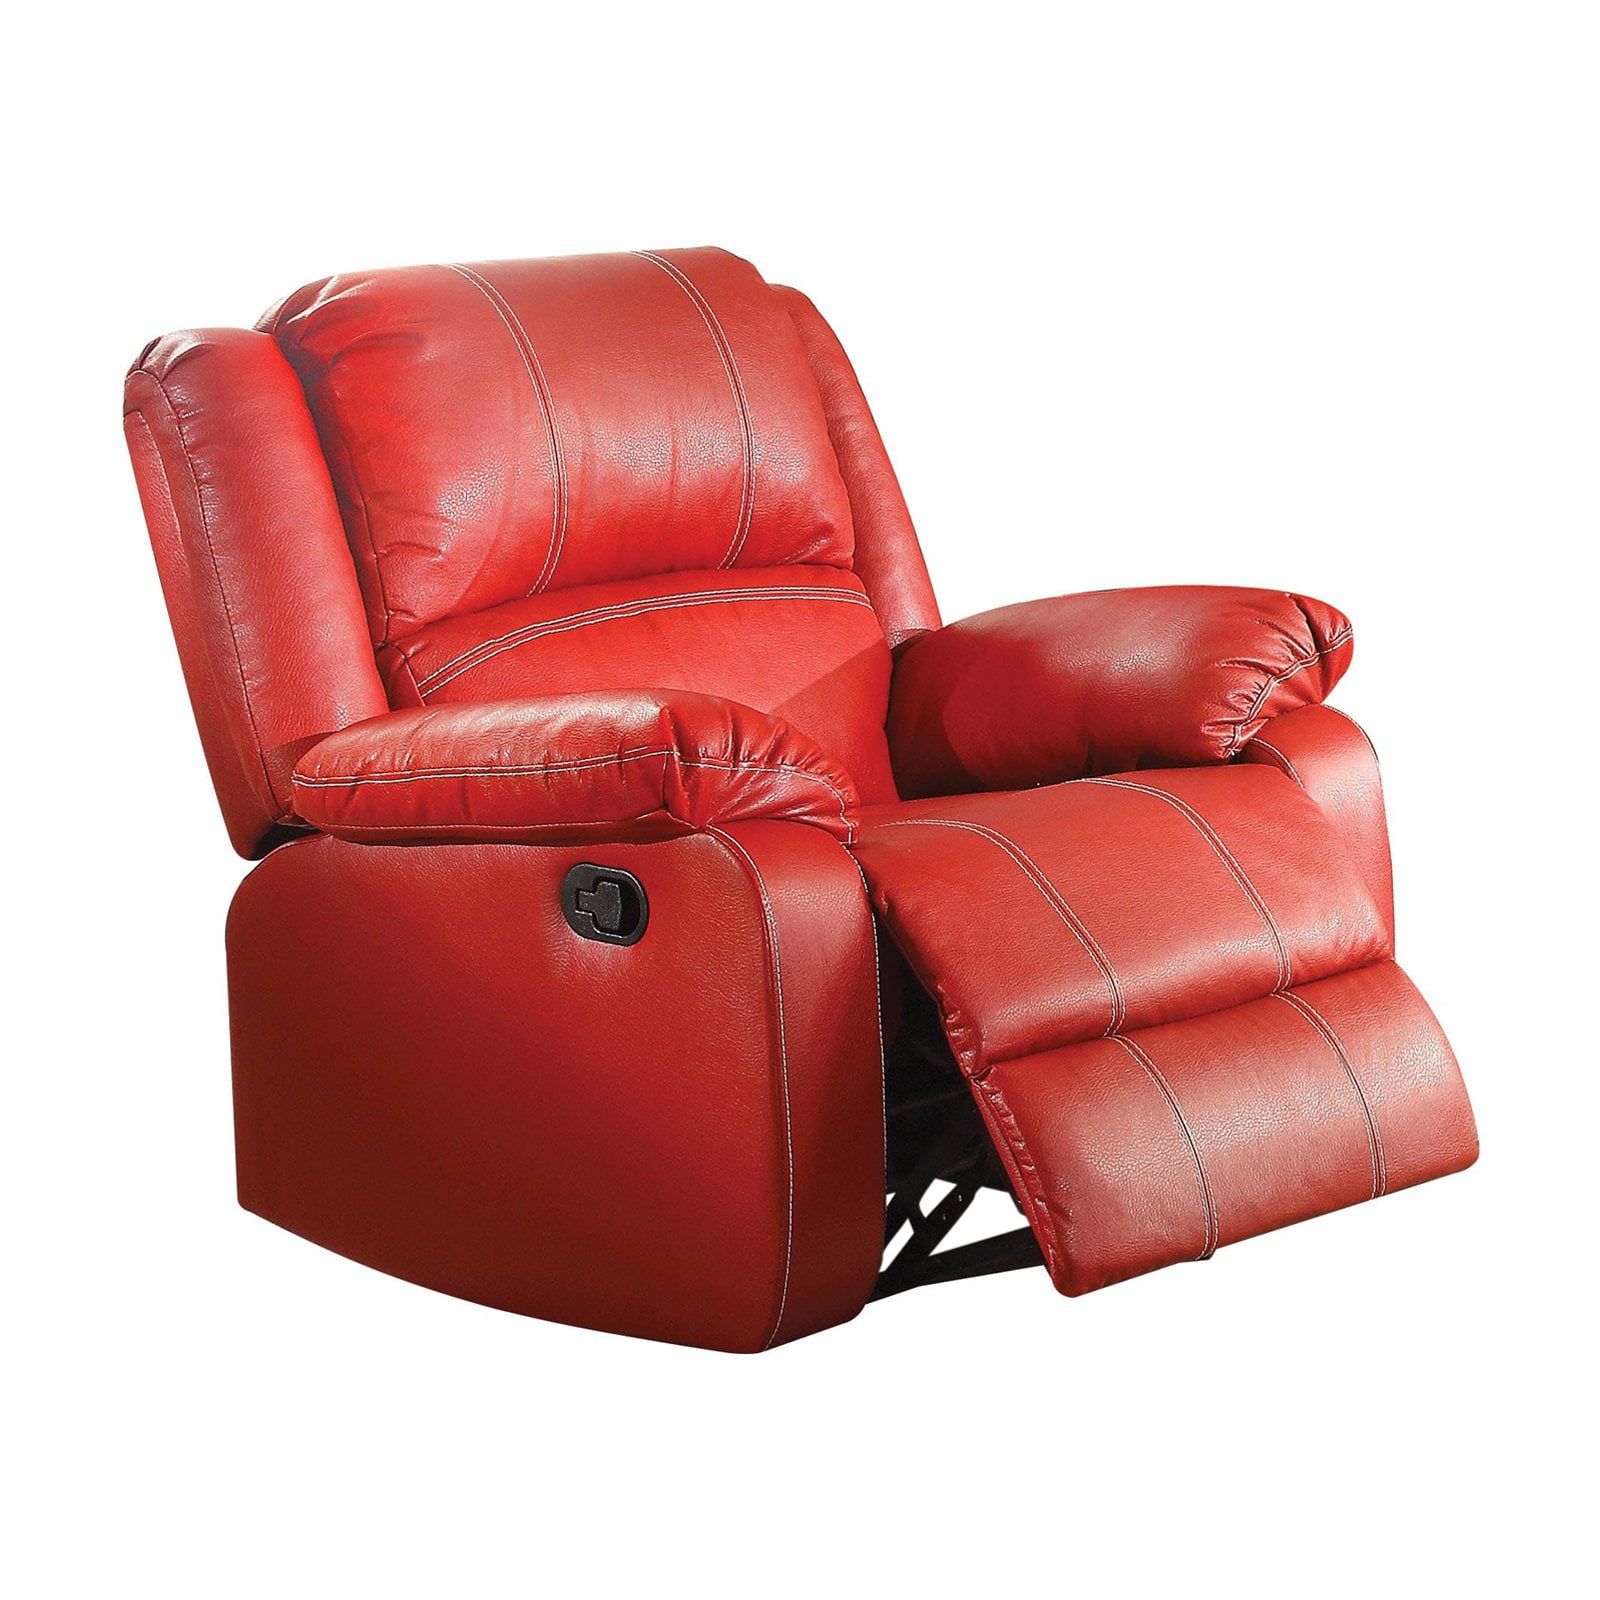 Picture of Benzara BM177635 Leather Rocker Recliner Chair, Red - 40 x 38.5 x 37 in.